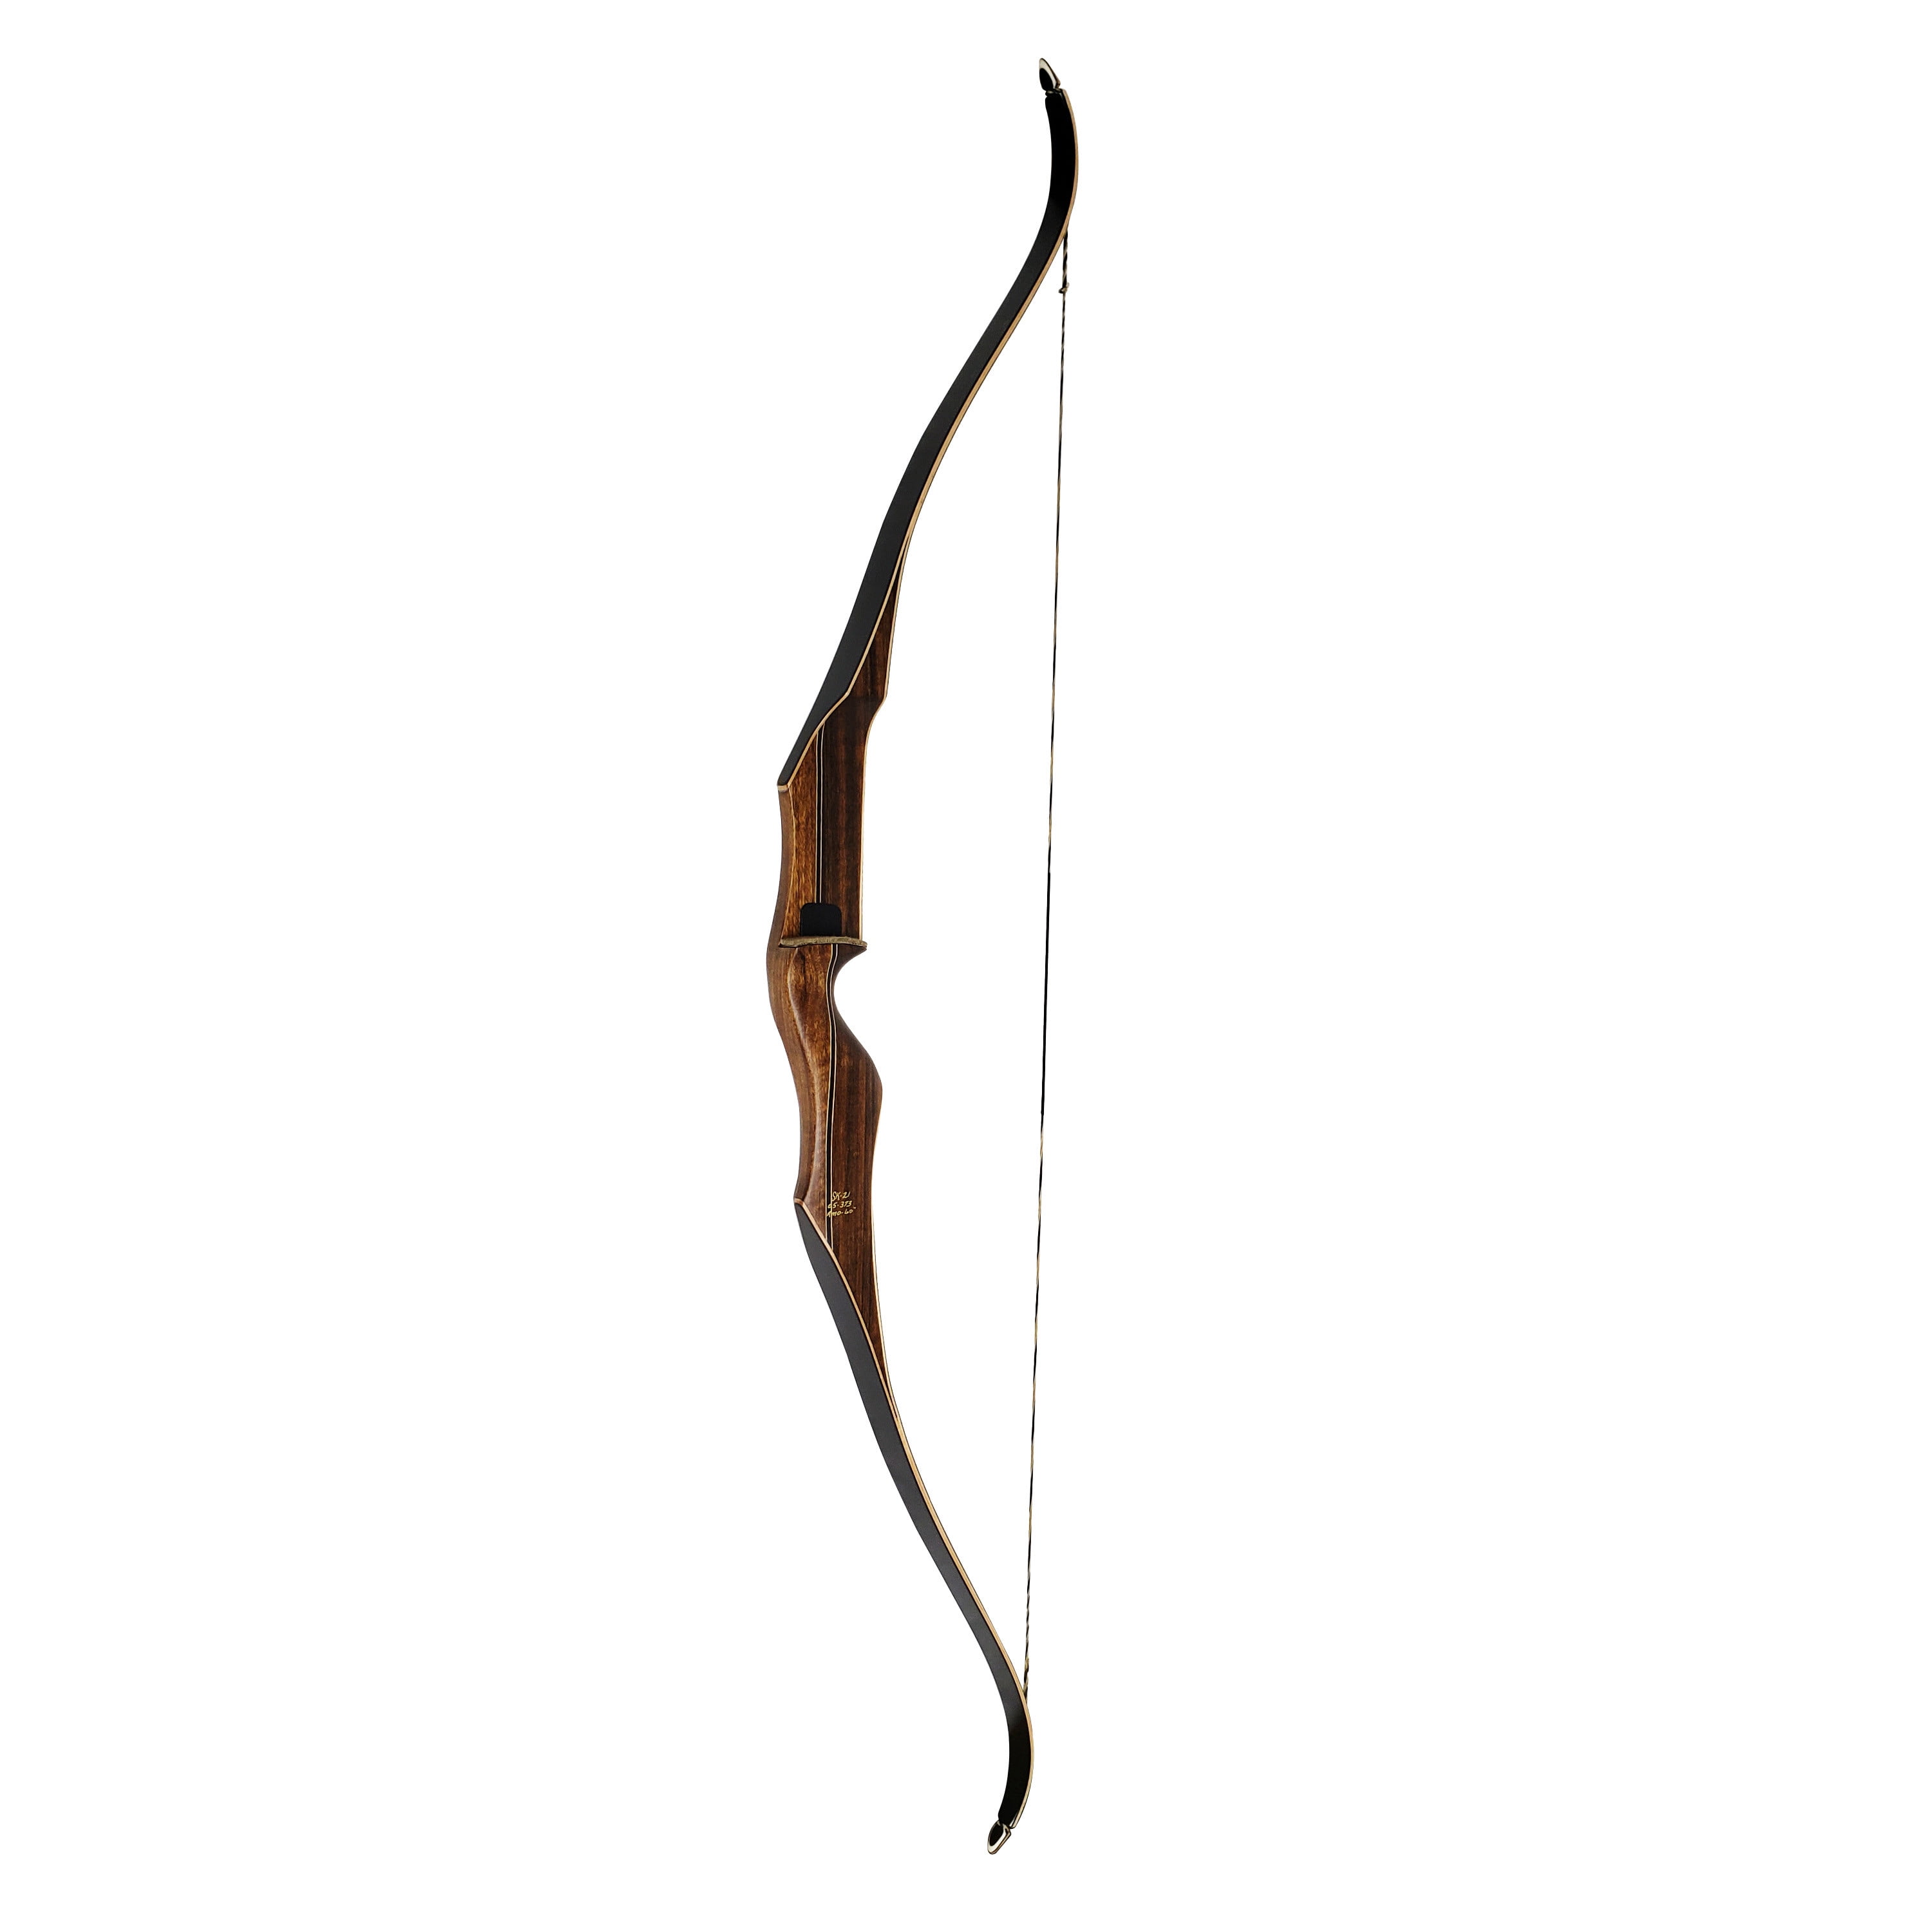 New PSE Mustang Take Down Recurve Bow 40# Right Hand AMO Length 60" 